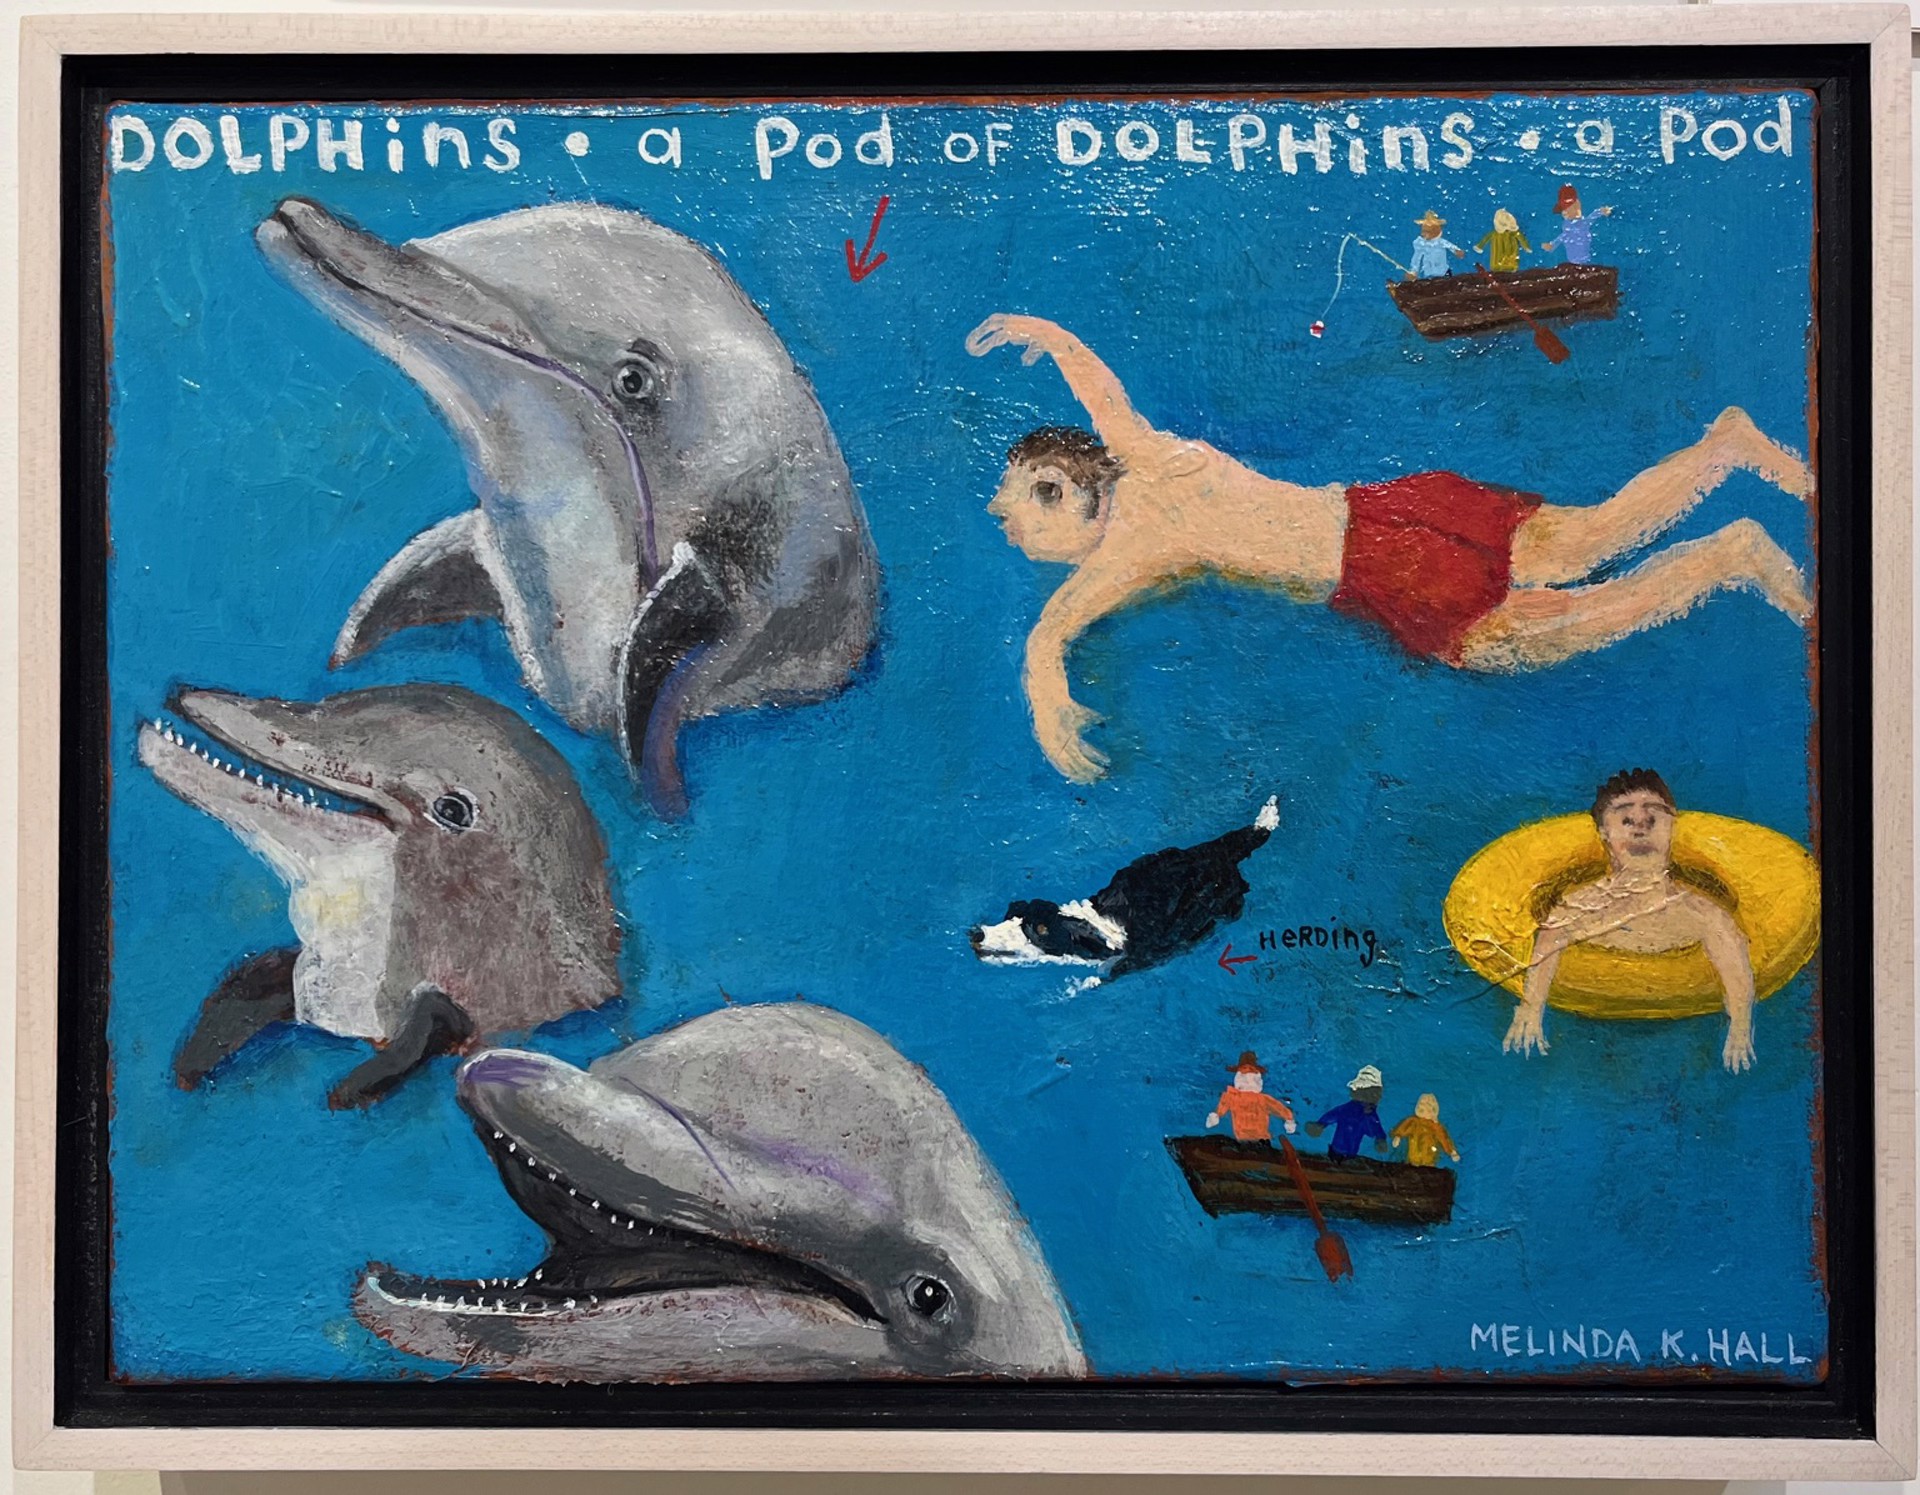 A Pod of Dolphins by Melinda K. Hall